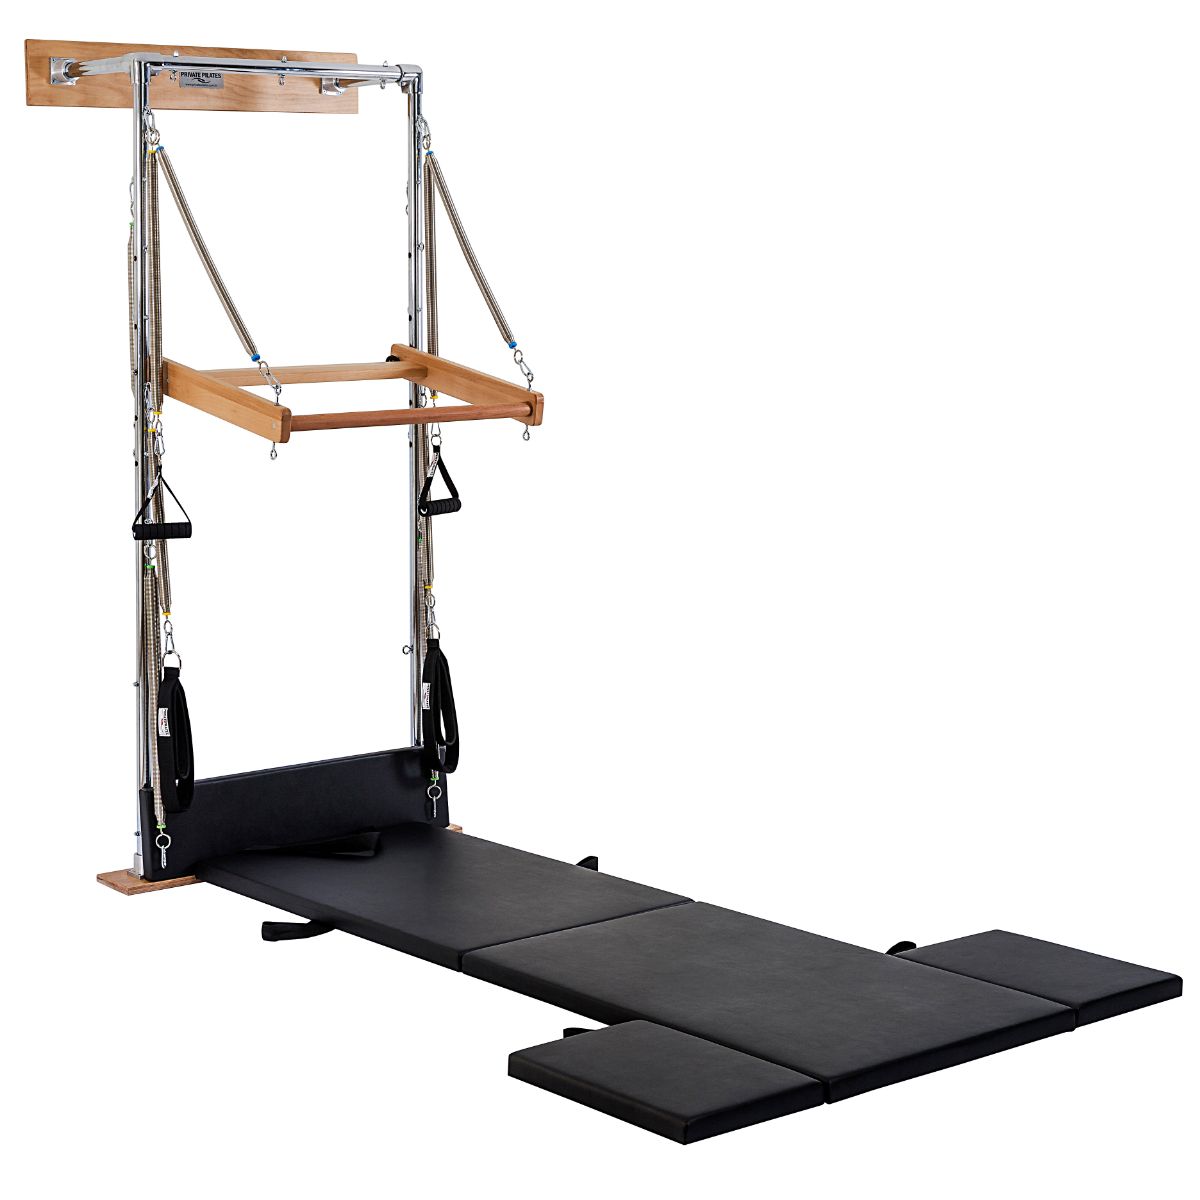 Buy Pilates Wall Units Online with Free Shipping – Pilates Reformers Plus